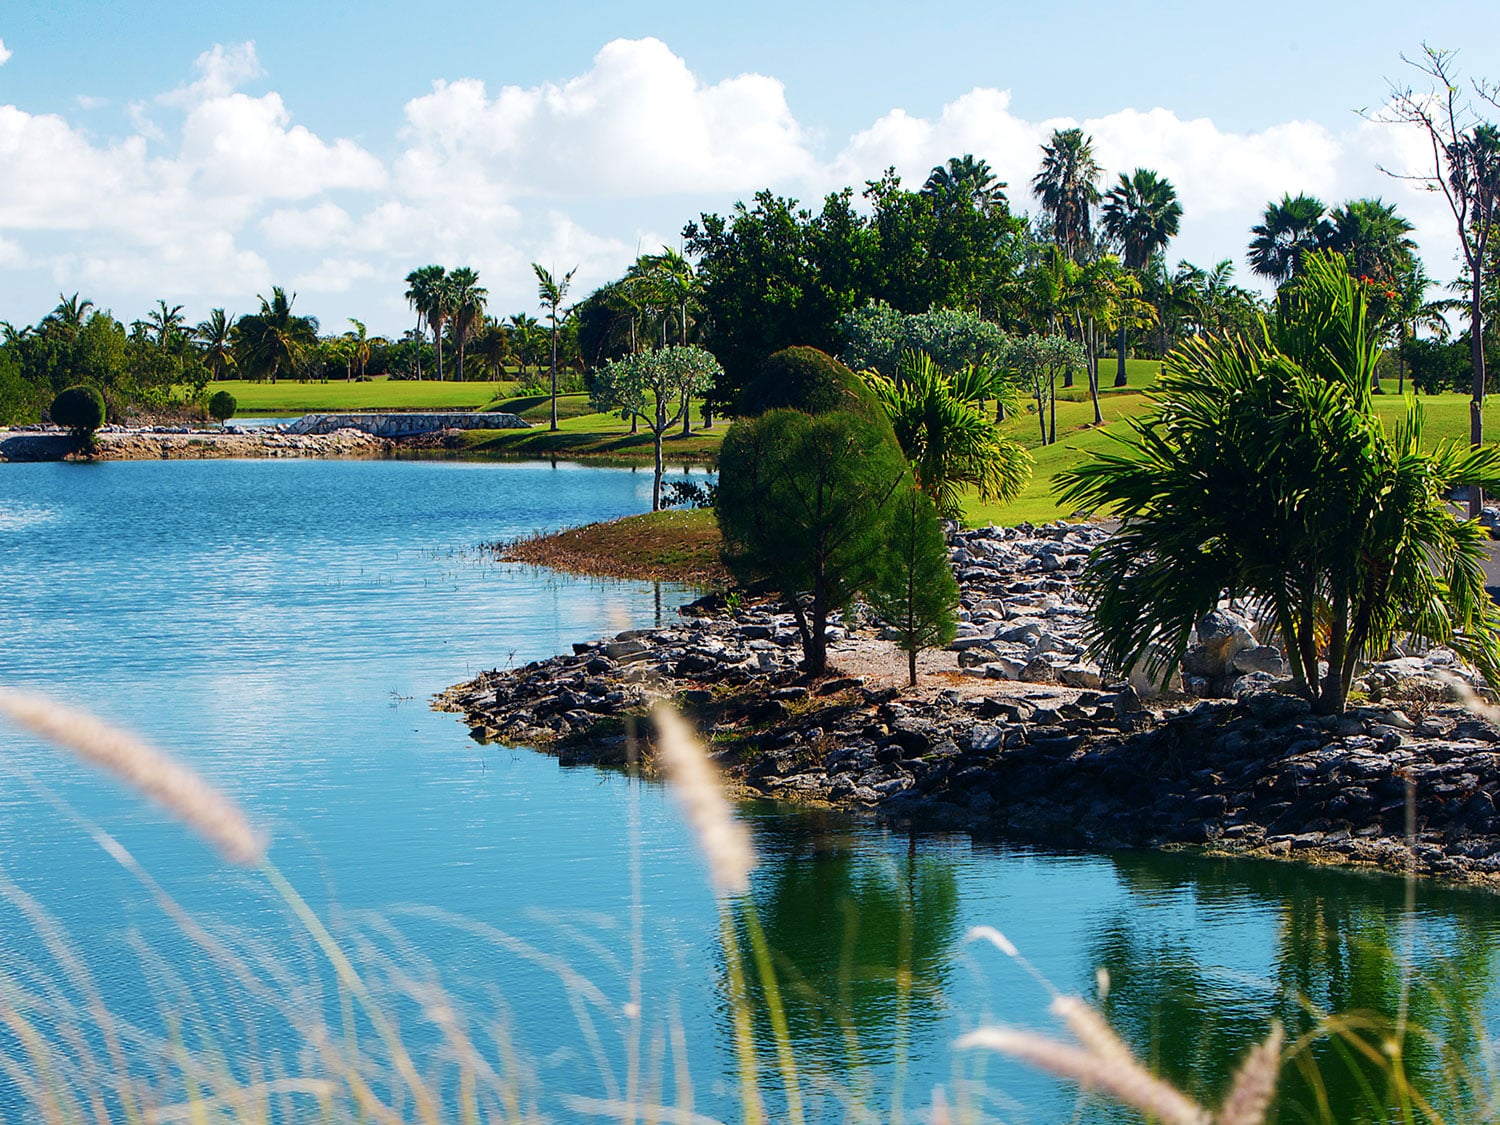 Hole 4 at Royal Turks and Caicos Golf Club is surrounded by beautiful native flora and fauna.